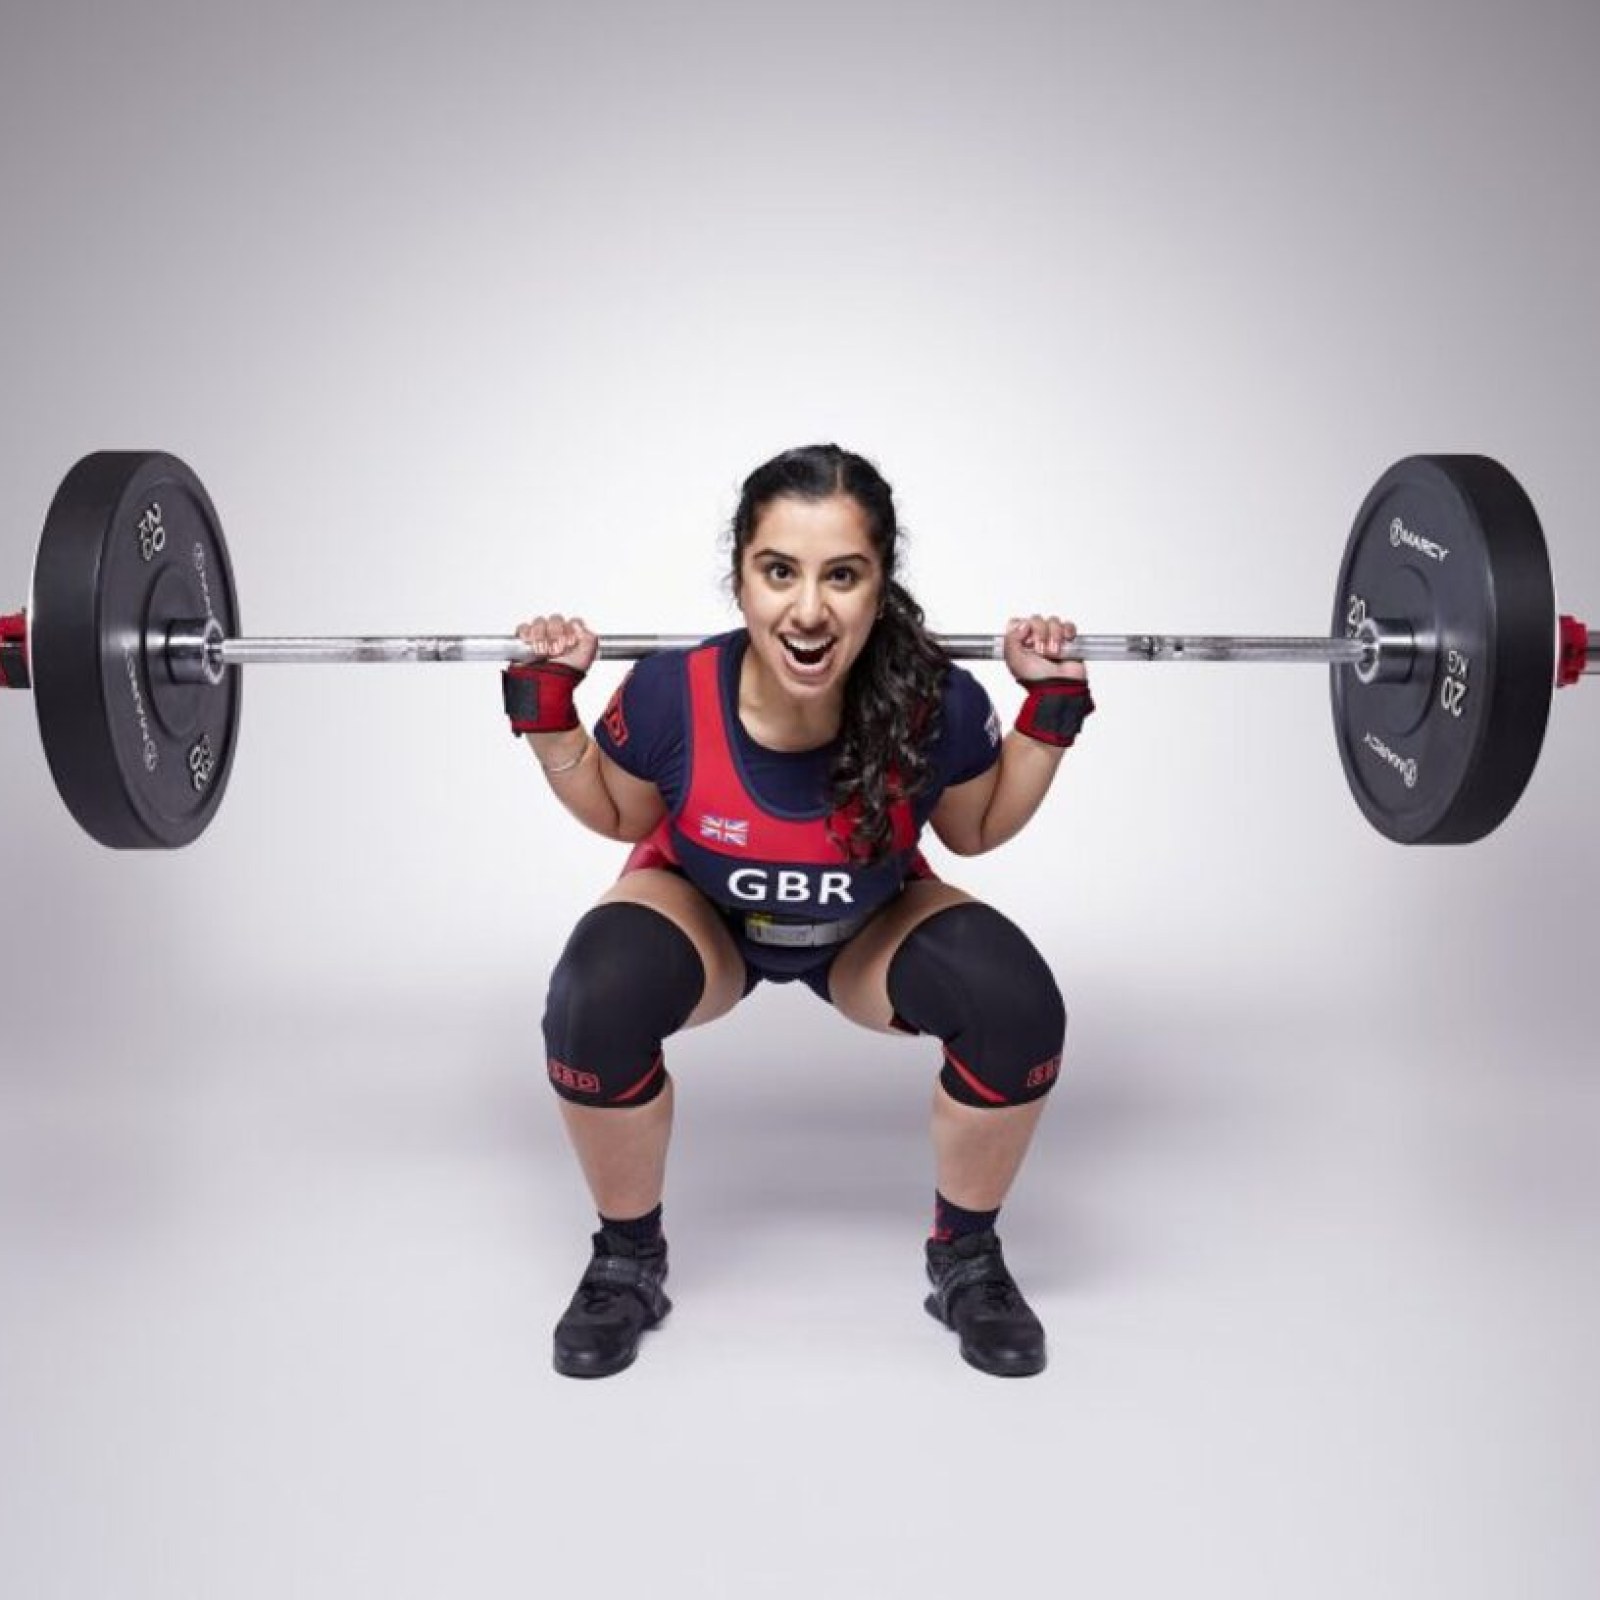 start alcohol fiber Woman Powerlifter Sets World Record for Squatting Own Body Weight